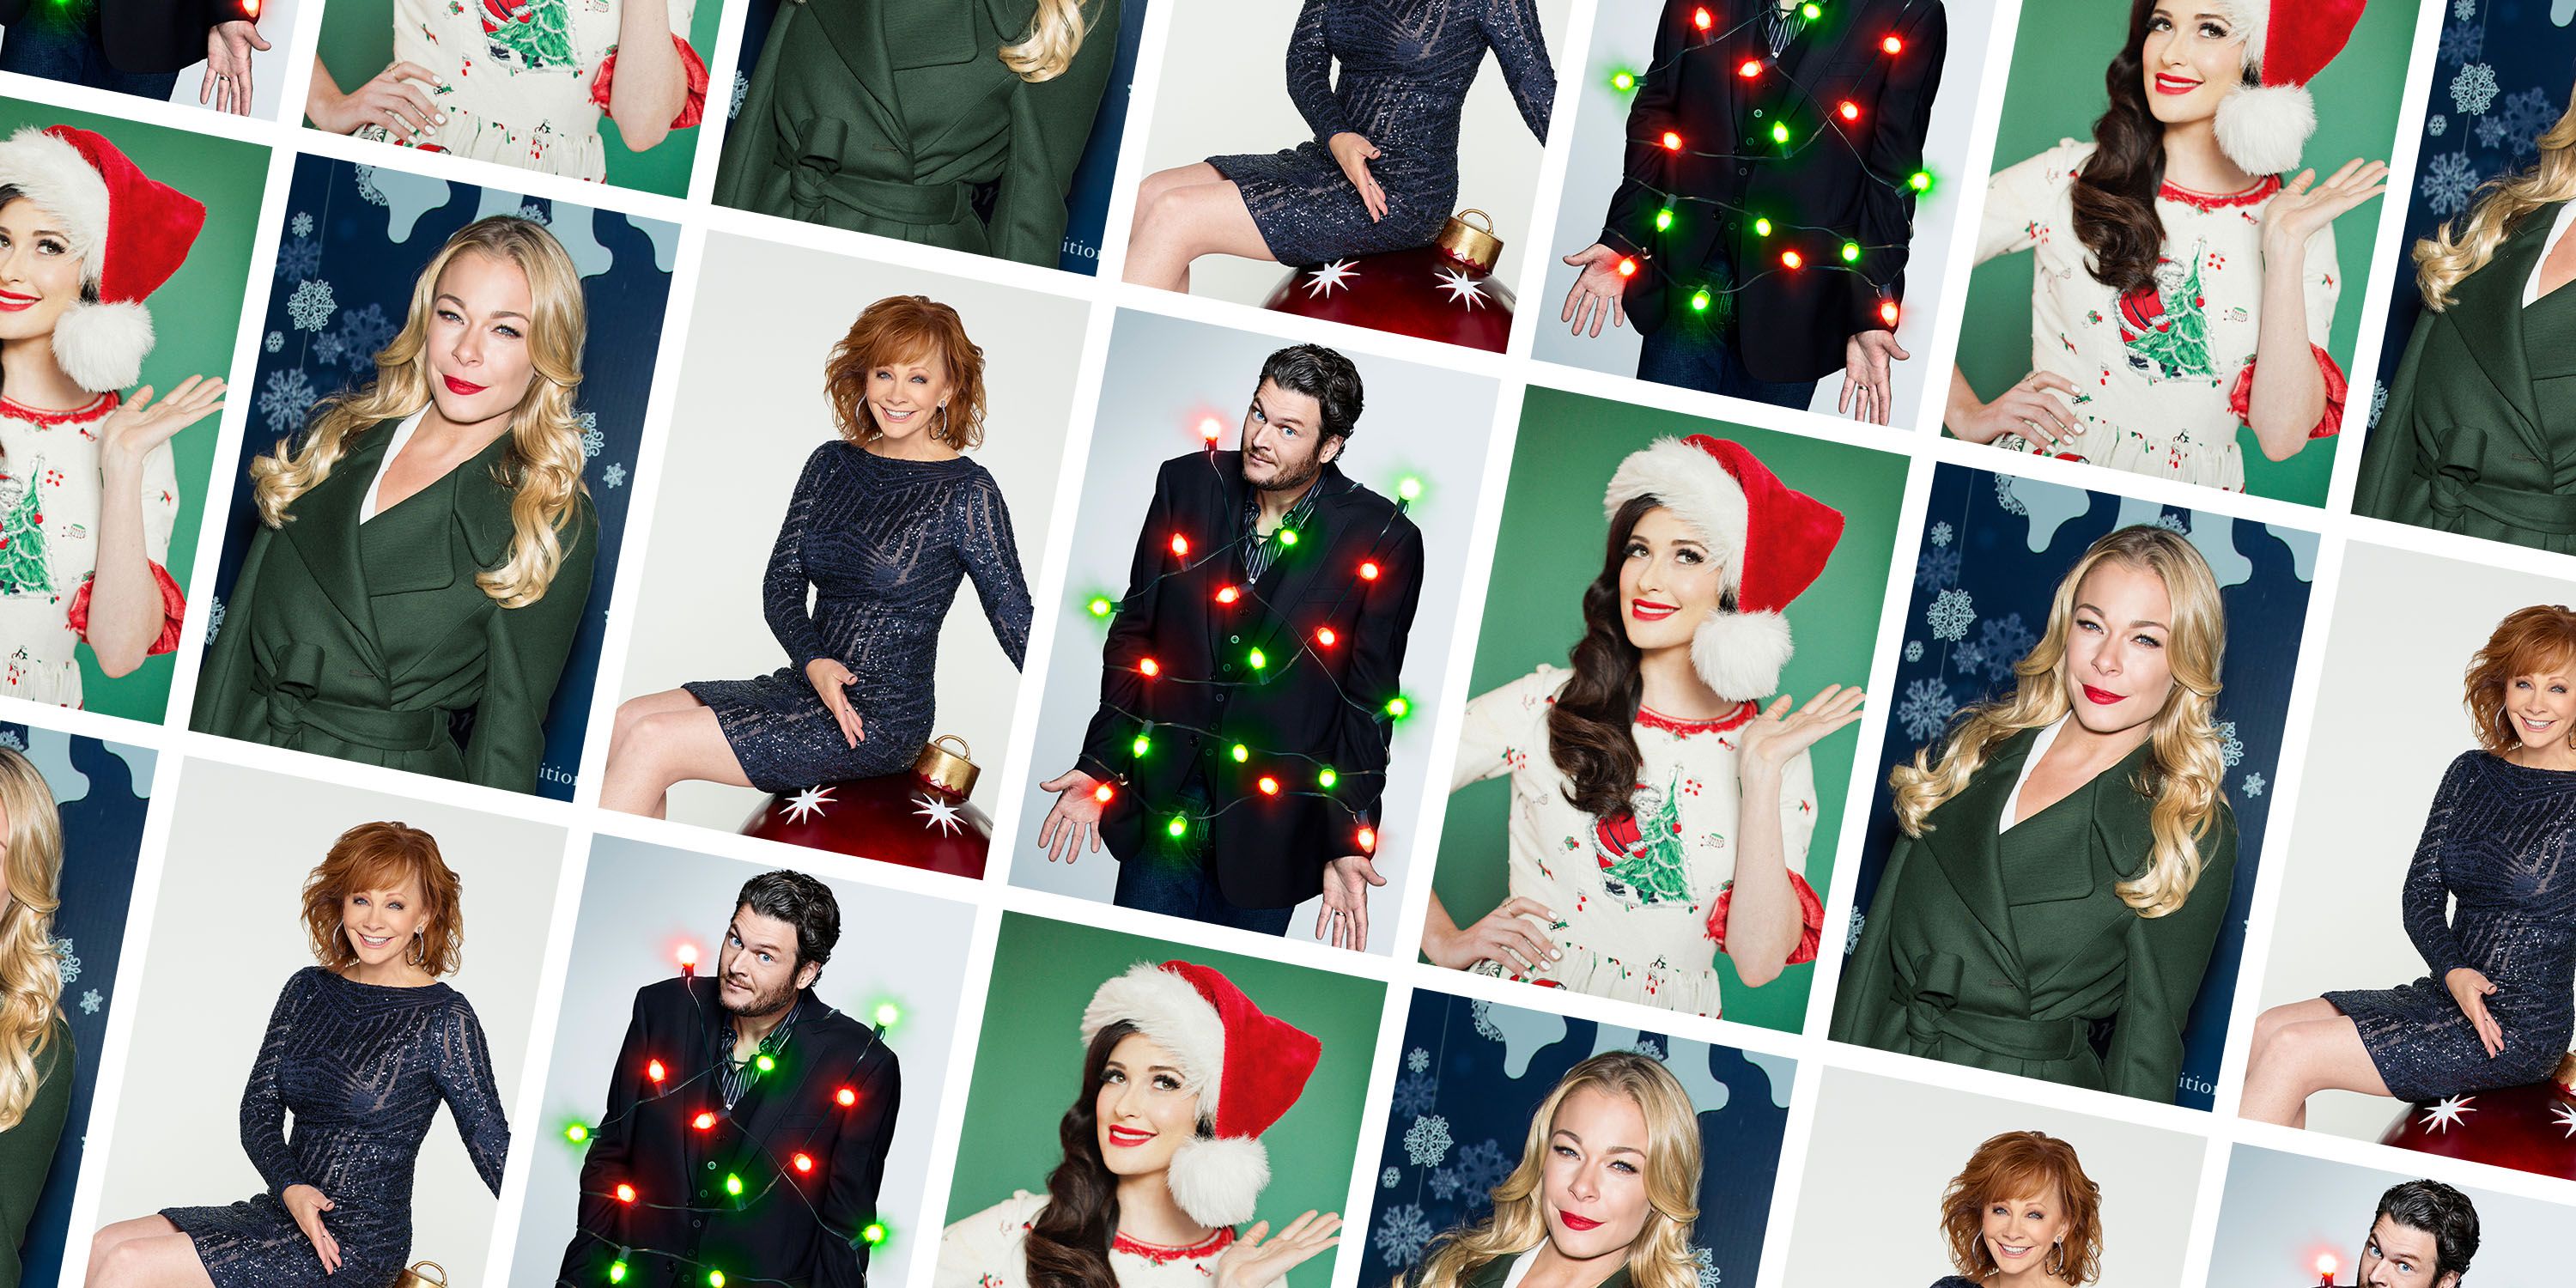 Watch Country Christmas Album Streaming Online